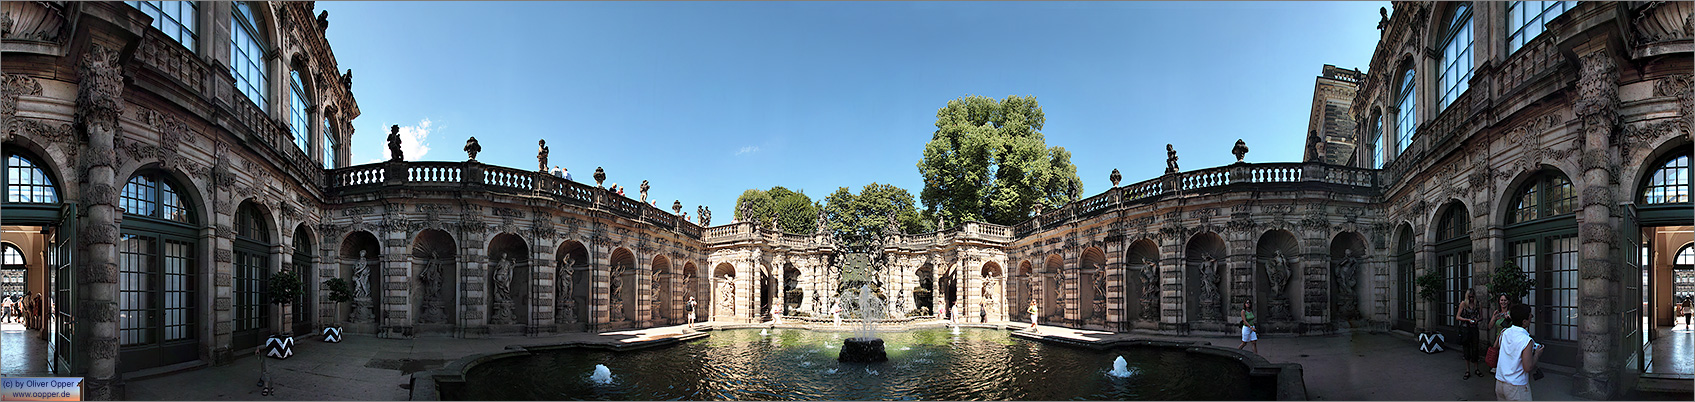 Panorama Dresden - Zwinger - p22 - (c) by Oliver Opper